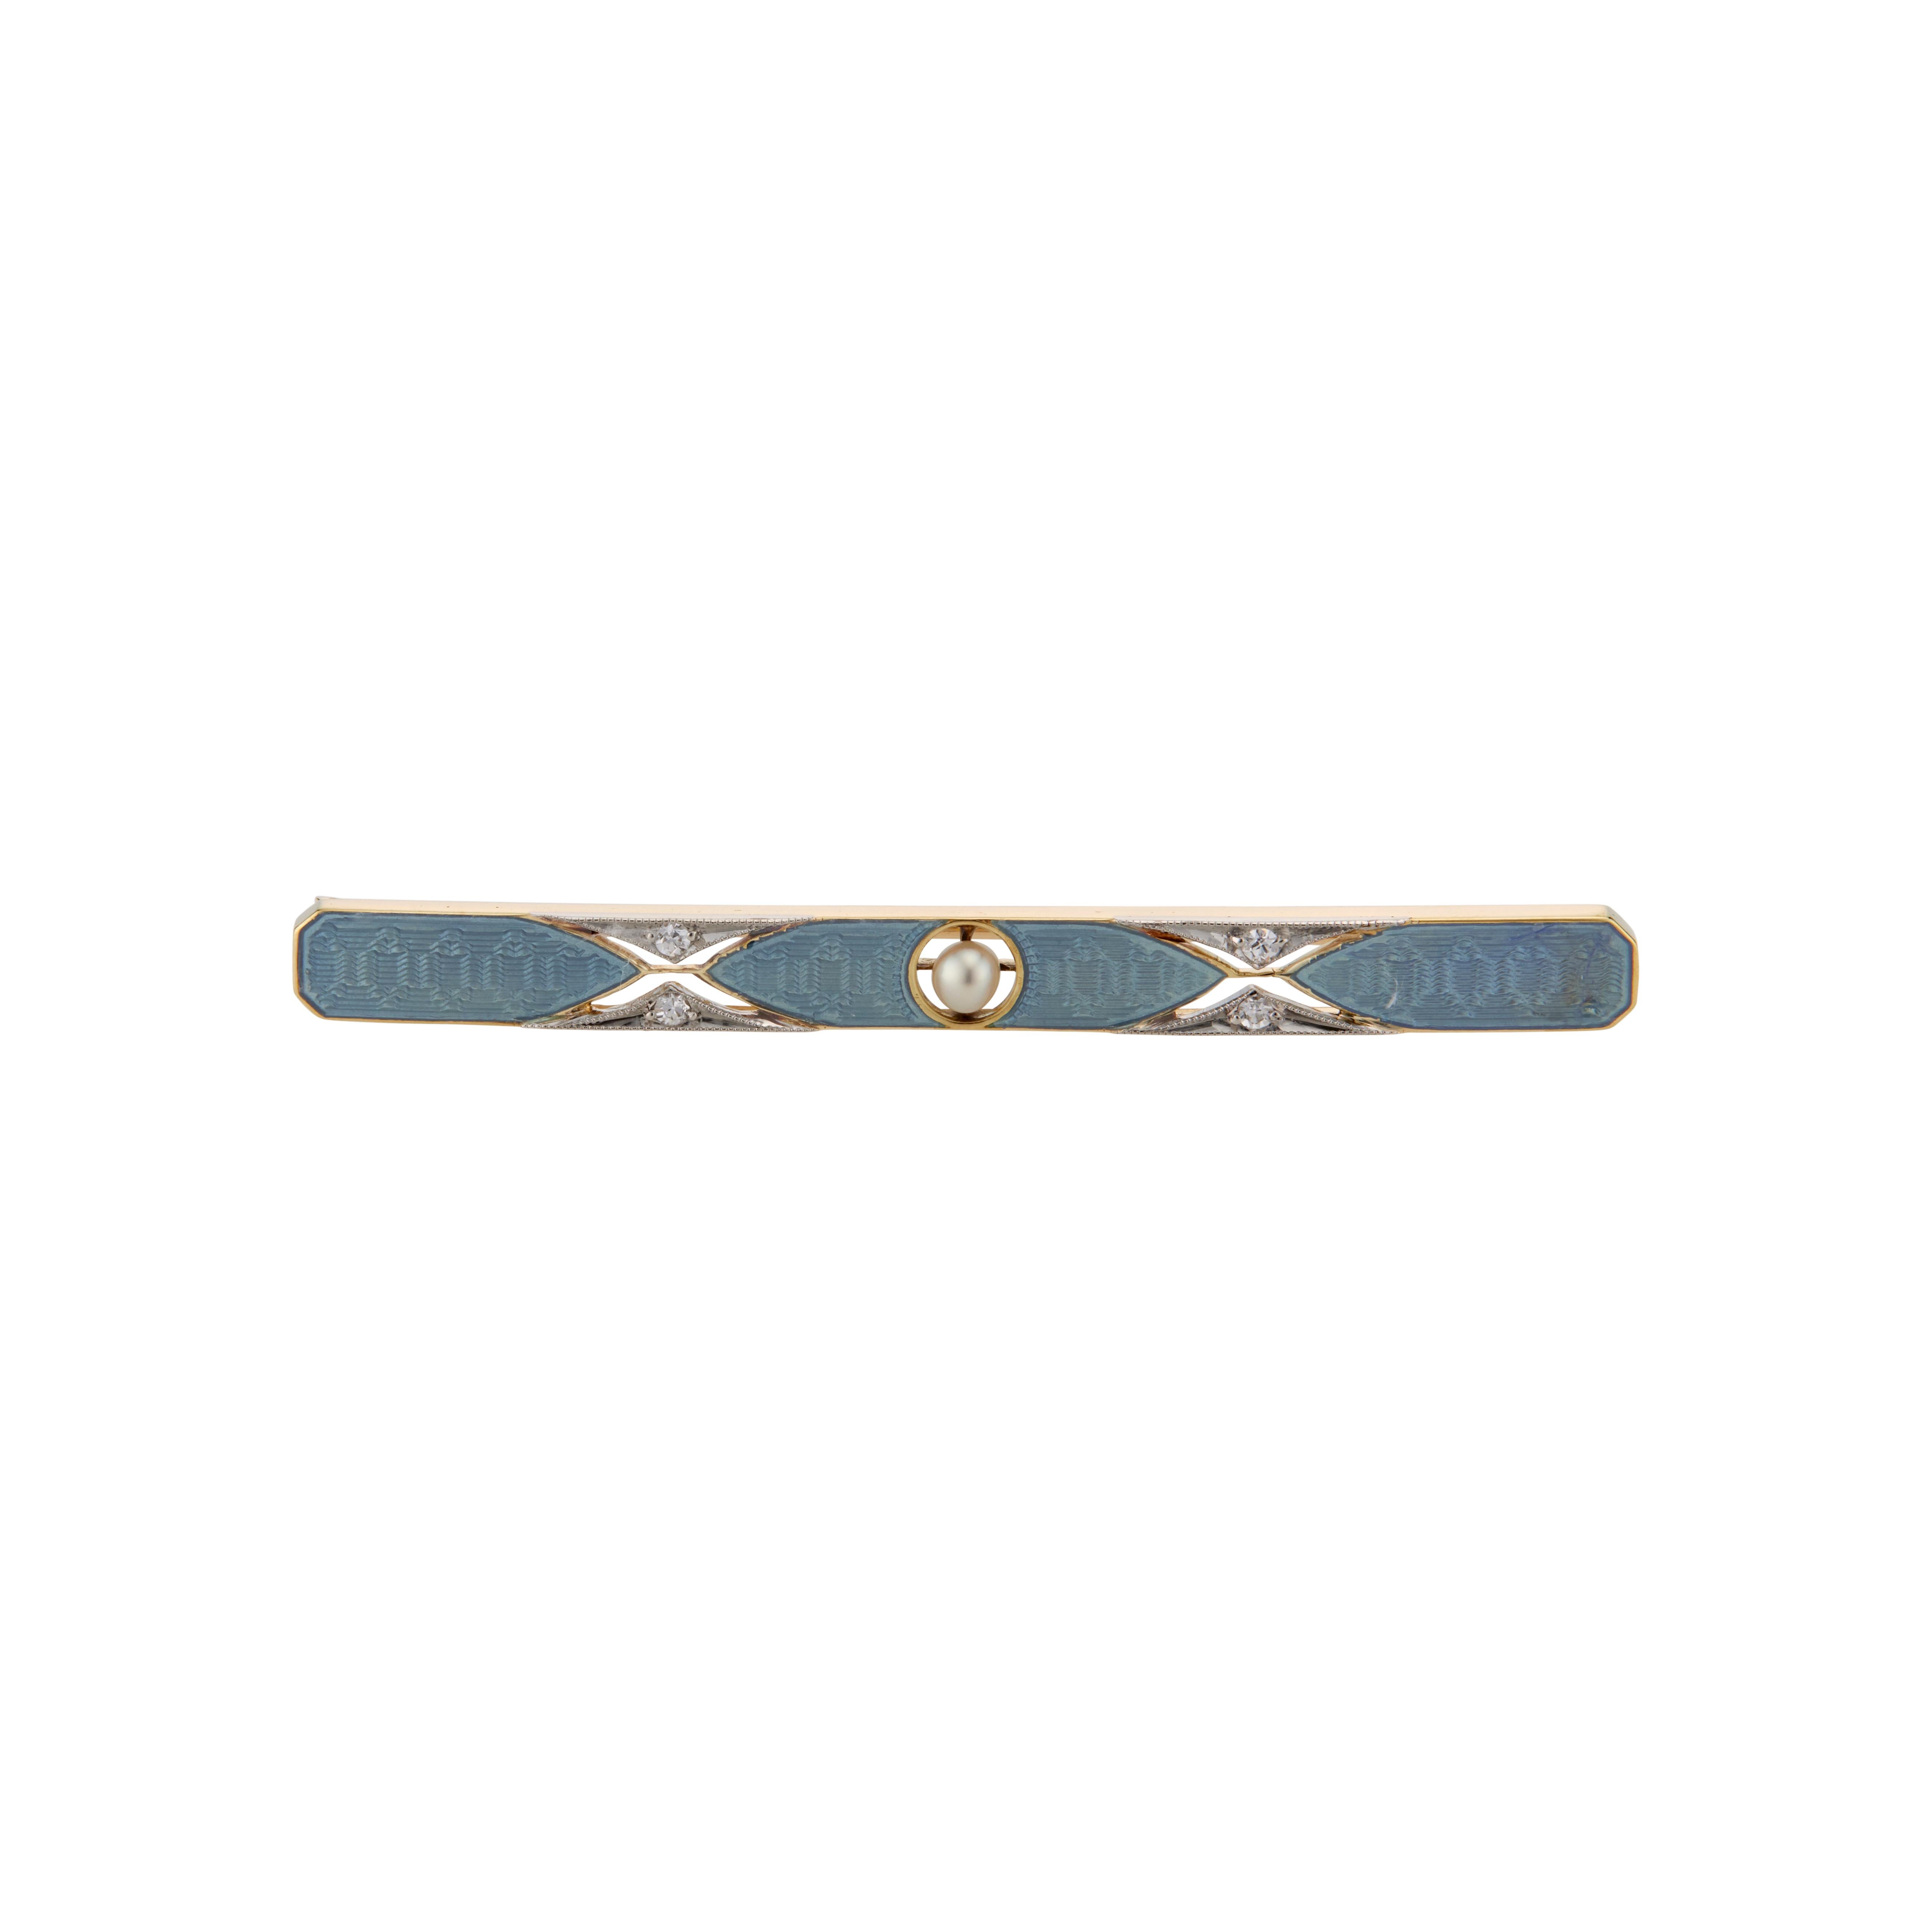 Early 1900's soft blue enamel bar brooch with natural pearl center and 4 single cut diamonds in Platinum and 14k yellow gold.  

1 natural pearl 3.3mm
4 single cut diamonds
14k yellow gold and Platinum
Stamped: 14k
Tested: 14k & Platinum
Hallmark: